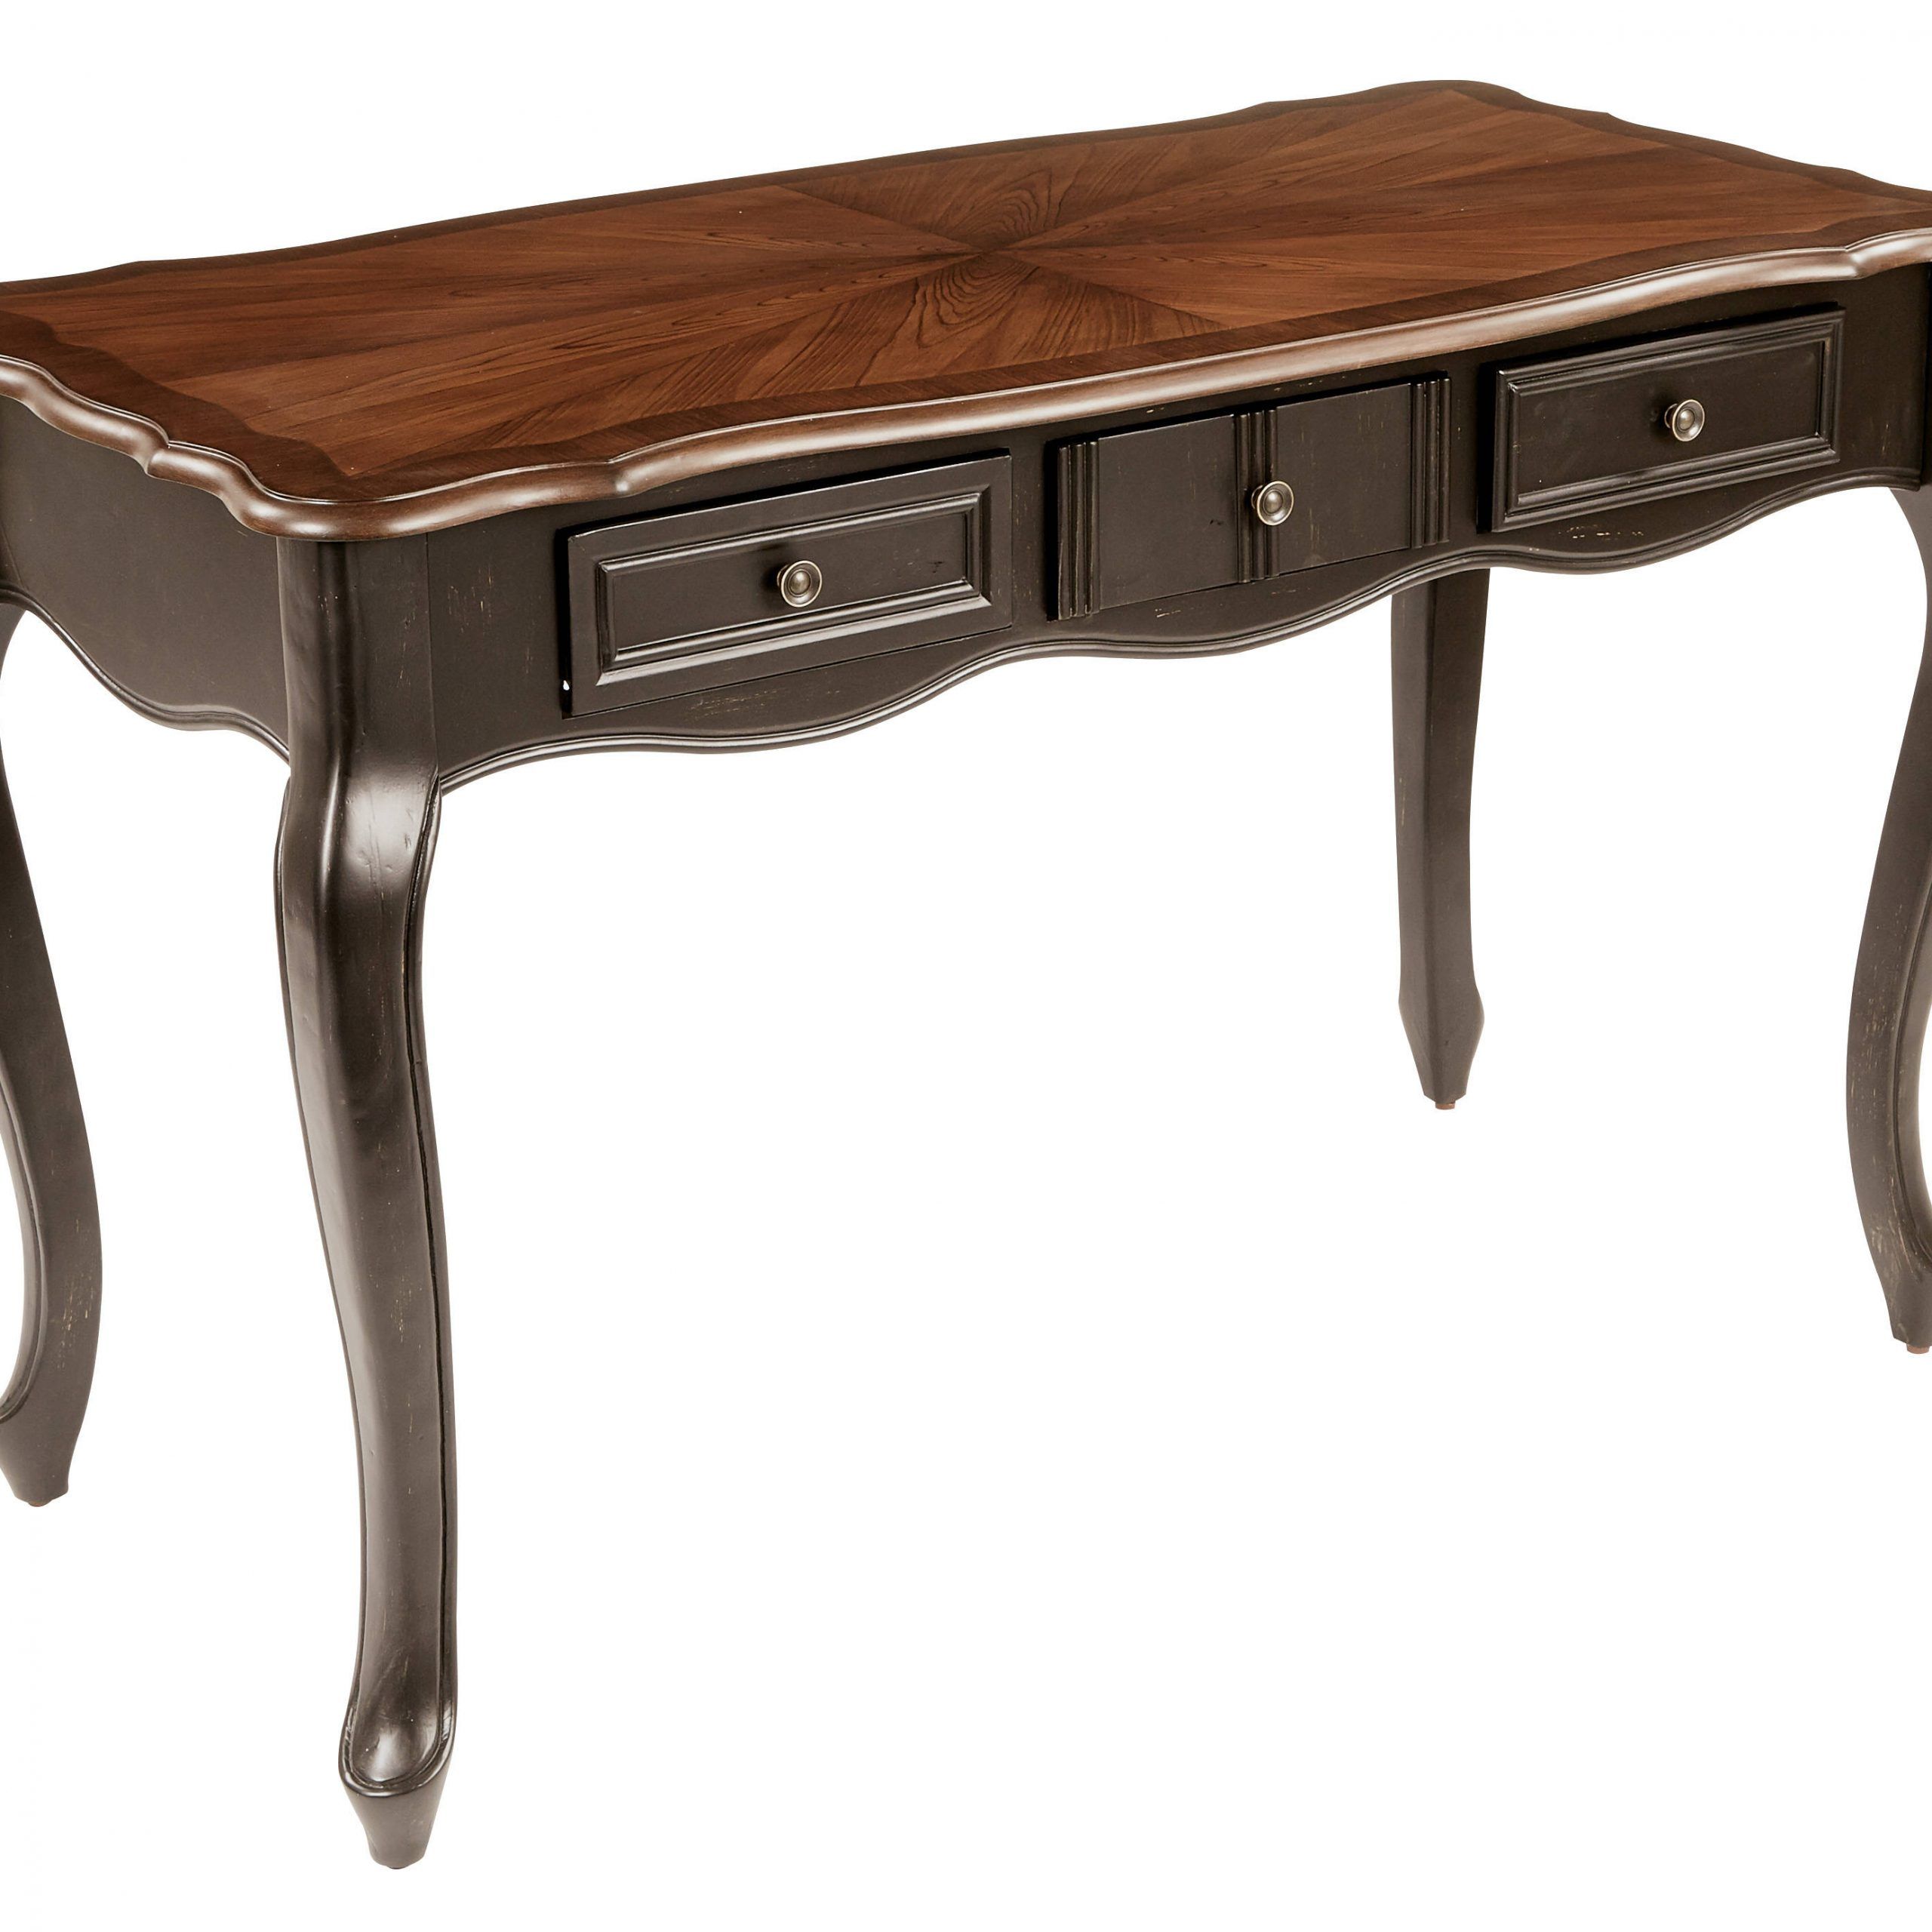 Wyndham Traditional Black Brown Wood 48 Inch Writing Desk | The Classy Home Intended For Dark Tobacco Writing Desks (View 15 of 15)